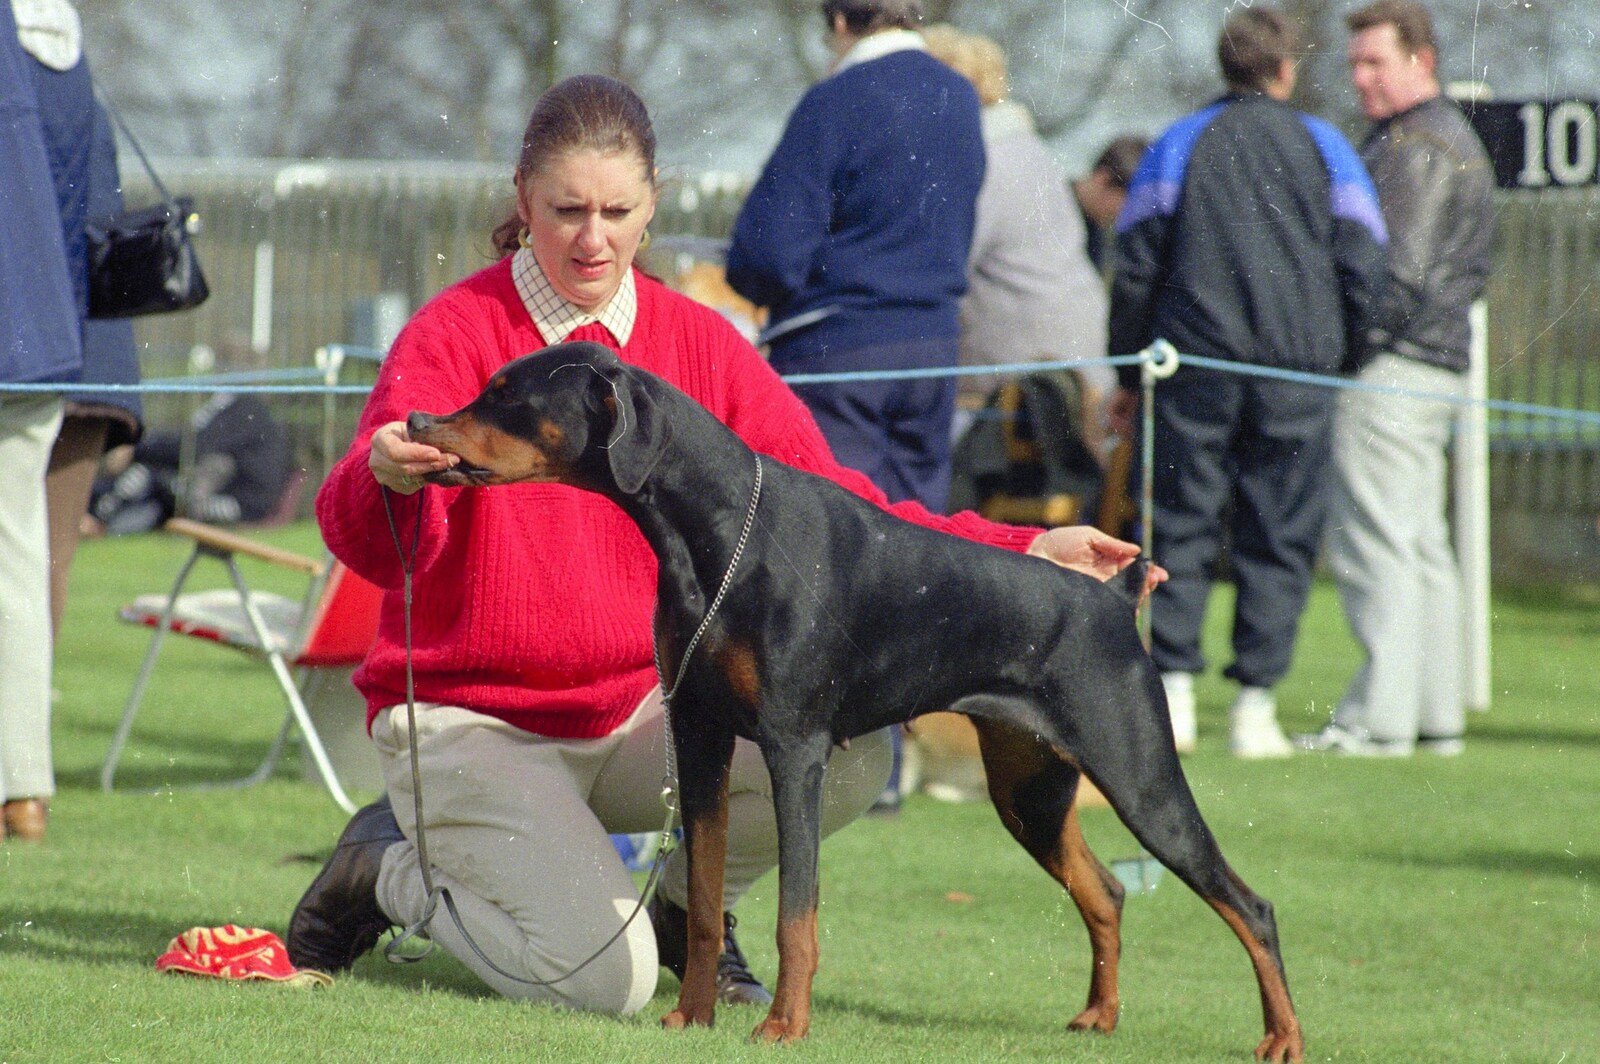 'Doggy' Anne sneaks a treat for her Doberman from The Newmarket Dog Show and Dobermans on the Ling, Newmarket and Wortham, Suffolk - 3rd April 1991